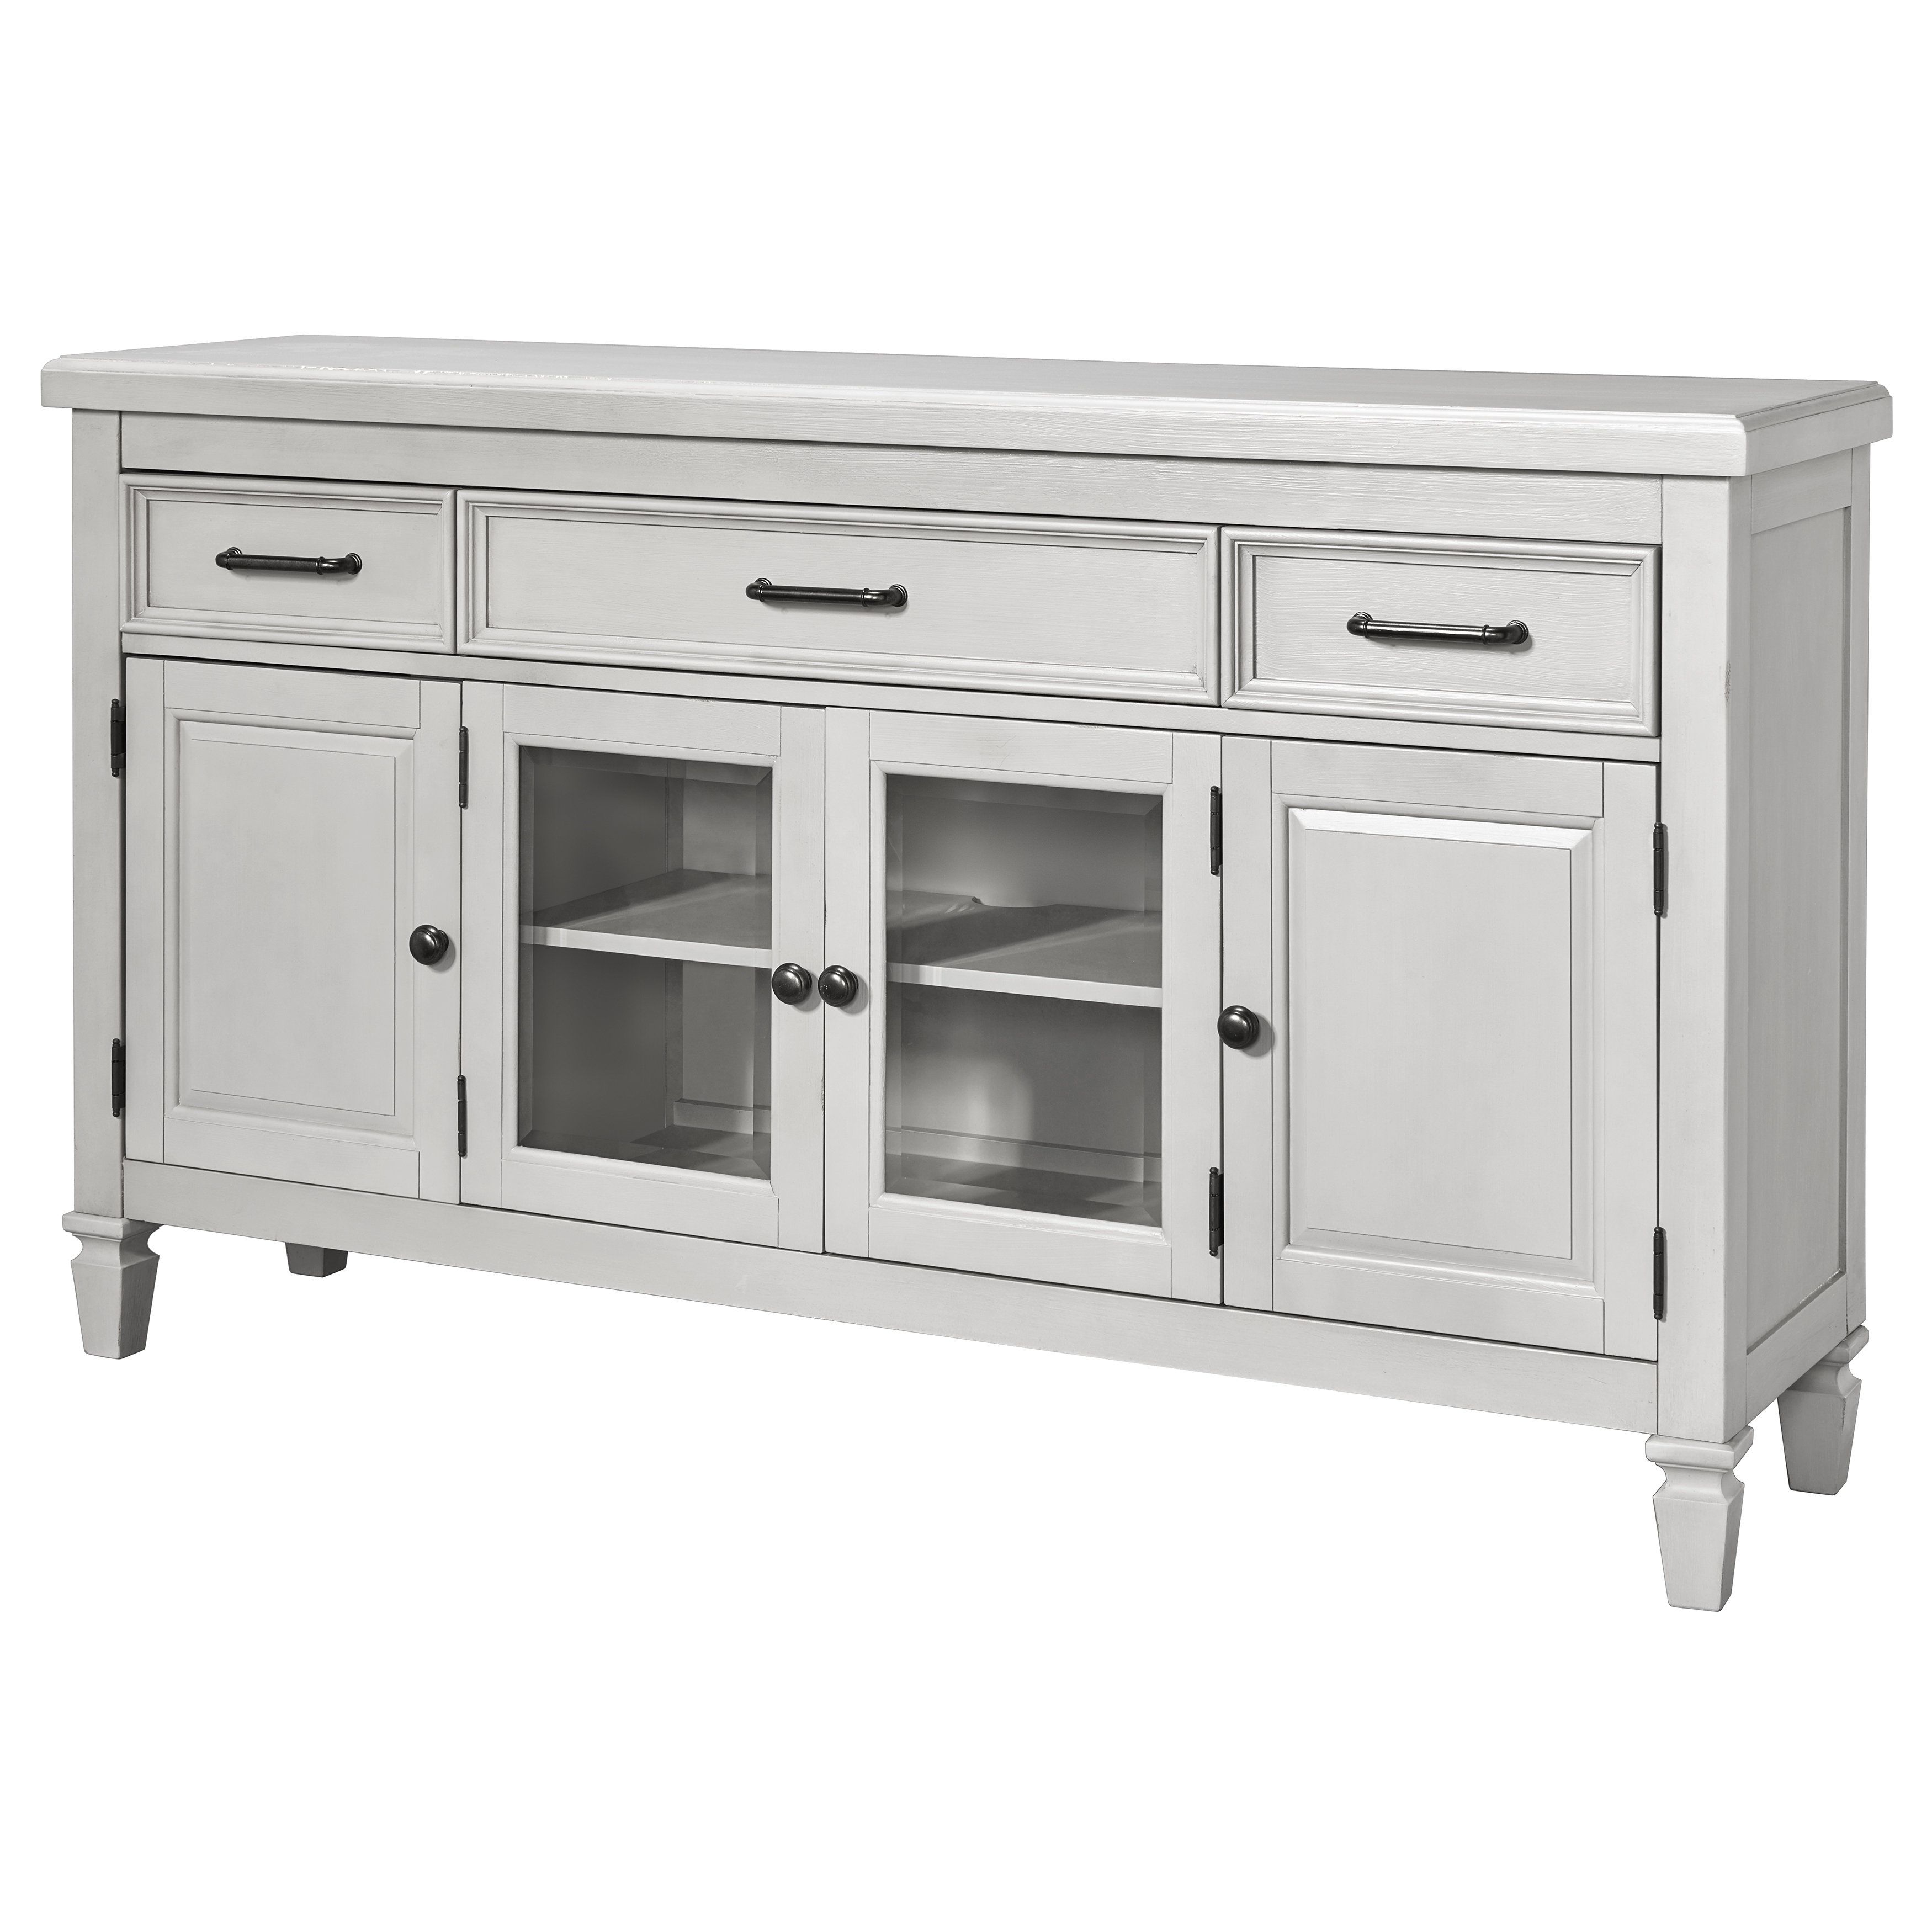 Farmhouse & Rustic Gracie Oaks Sideboards & Buffets | Birch Lane Throughout Hayter Sideboards (View 23 of 30)